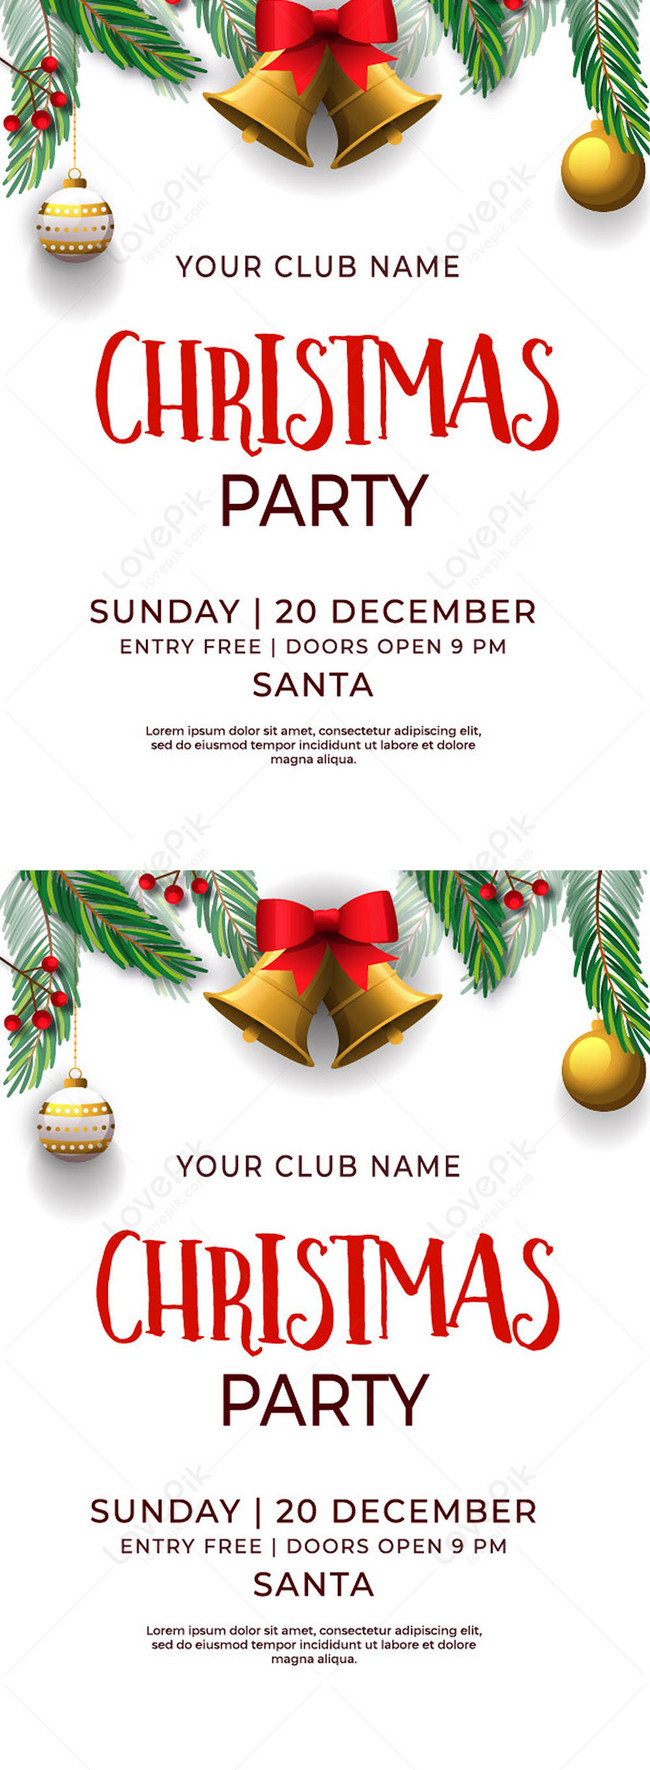 Merry christmas party flyer template image_picture free download  